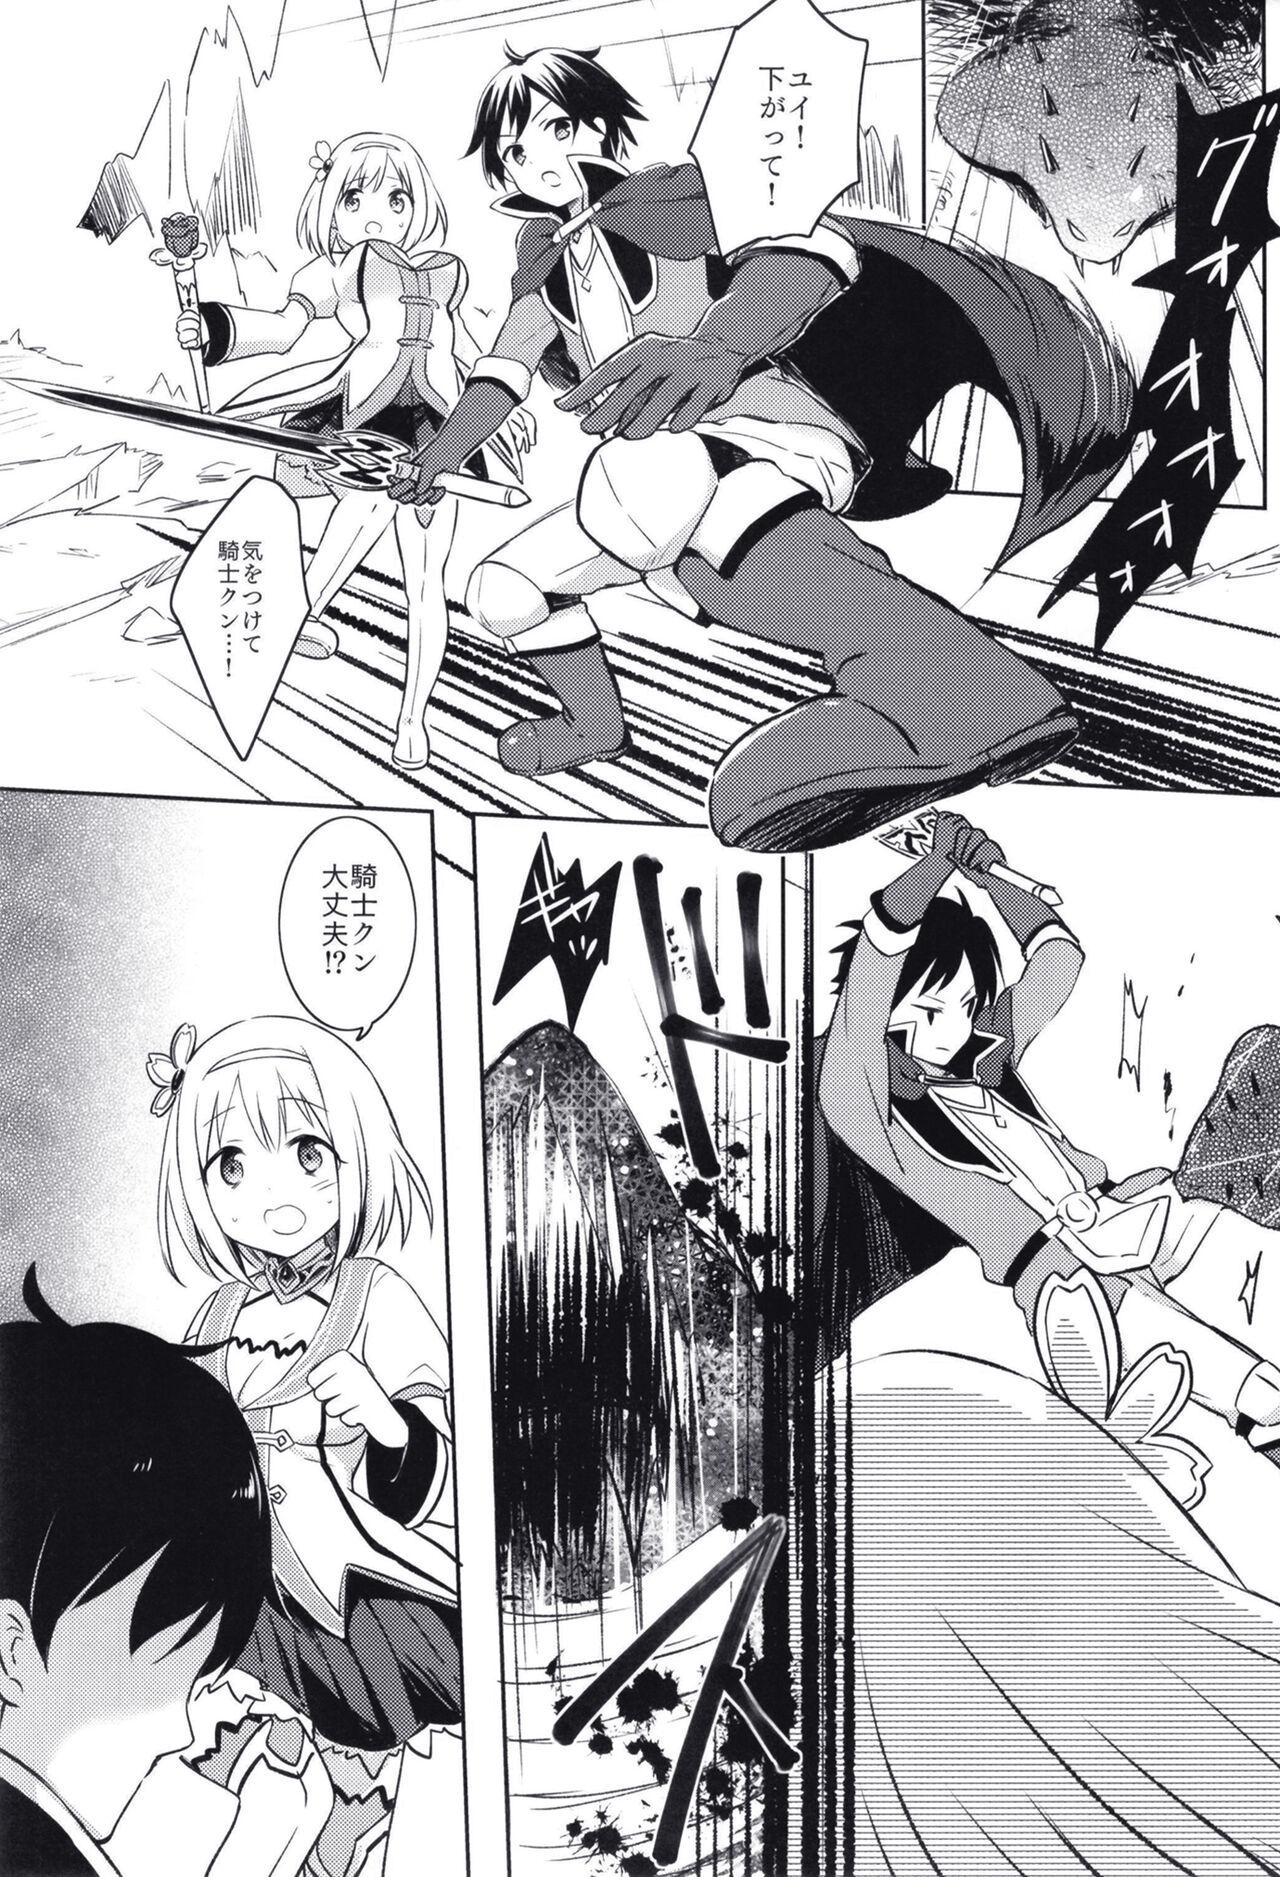 Butt Plug Yui to Icha Love True End!? - Princess connect Brother - Page 3